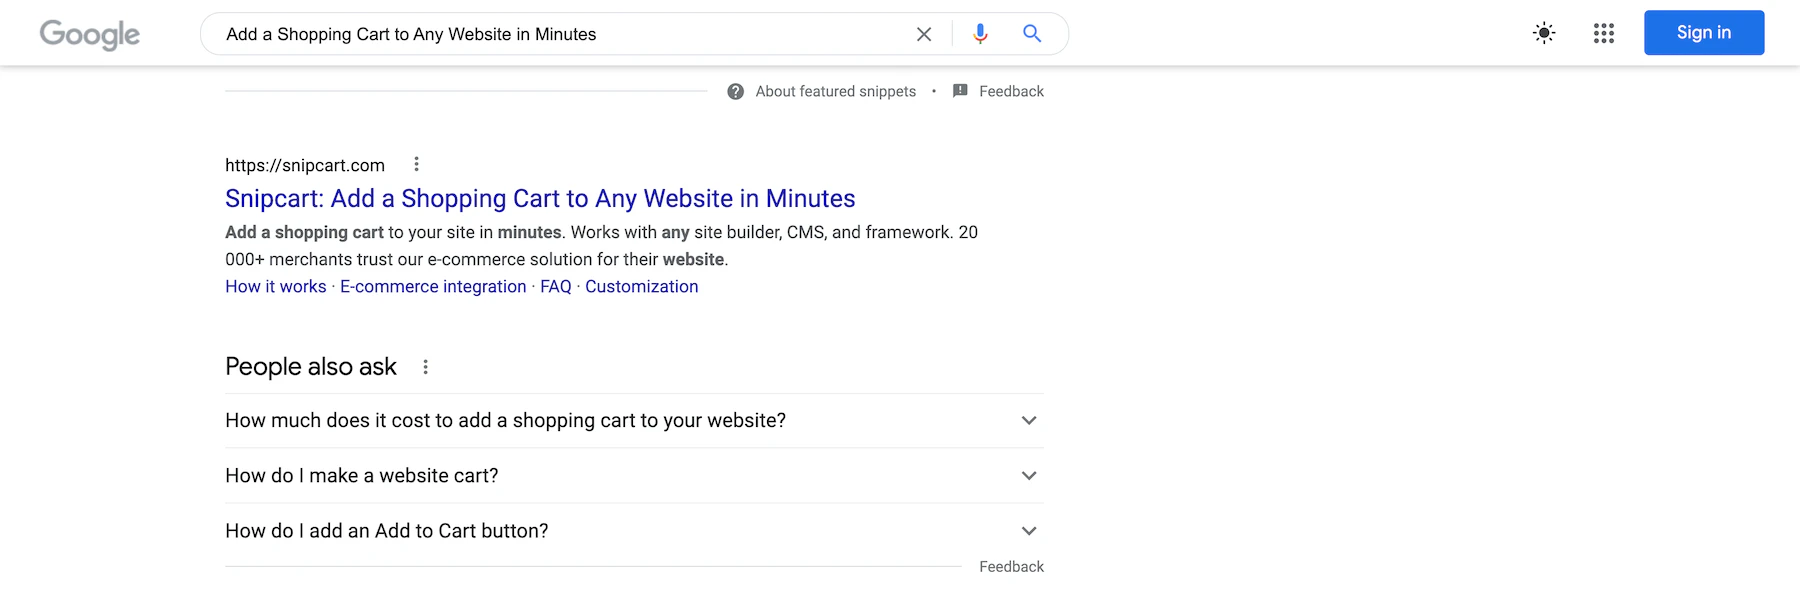 SEO for Add a Shopping Cart to Any Websites in Minutes